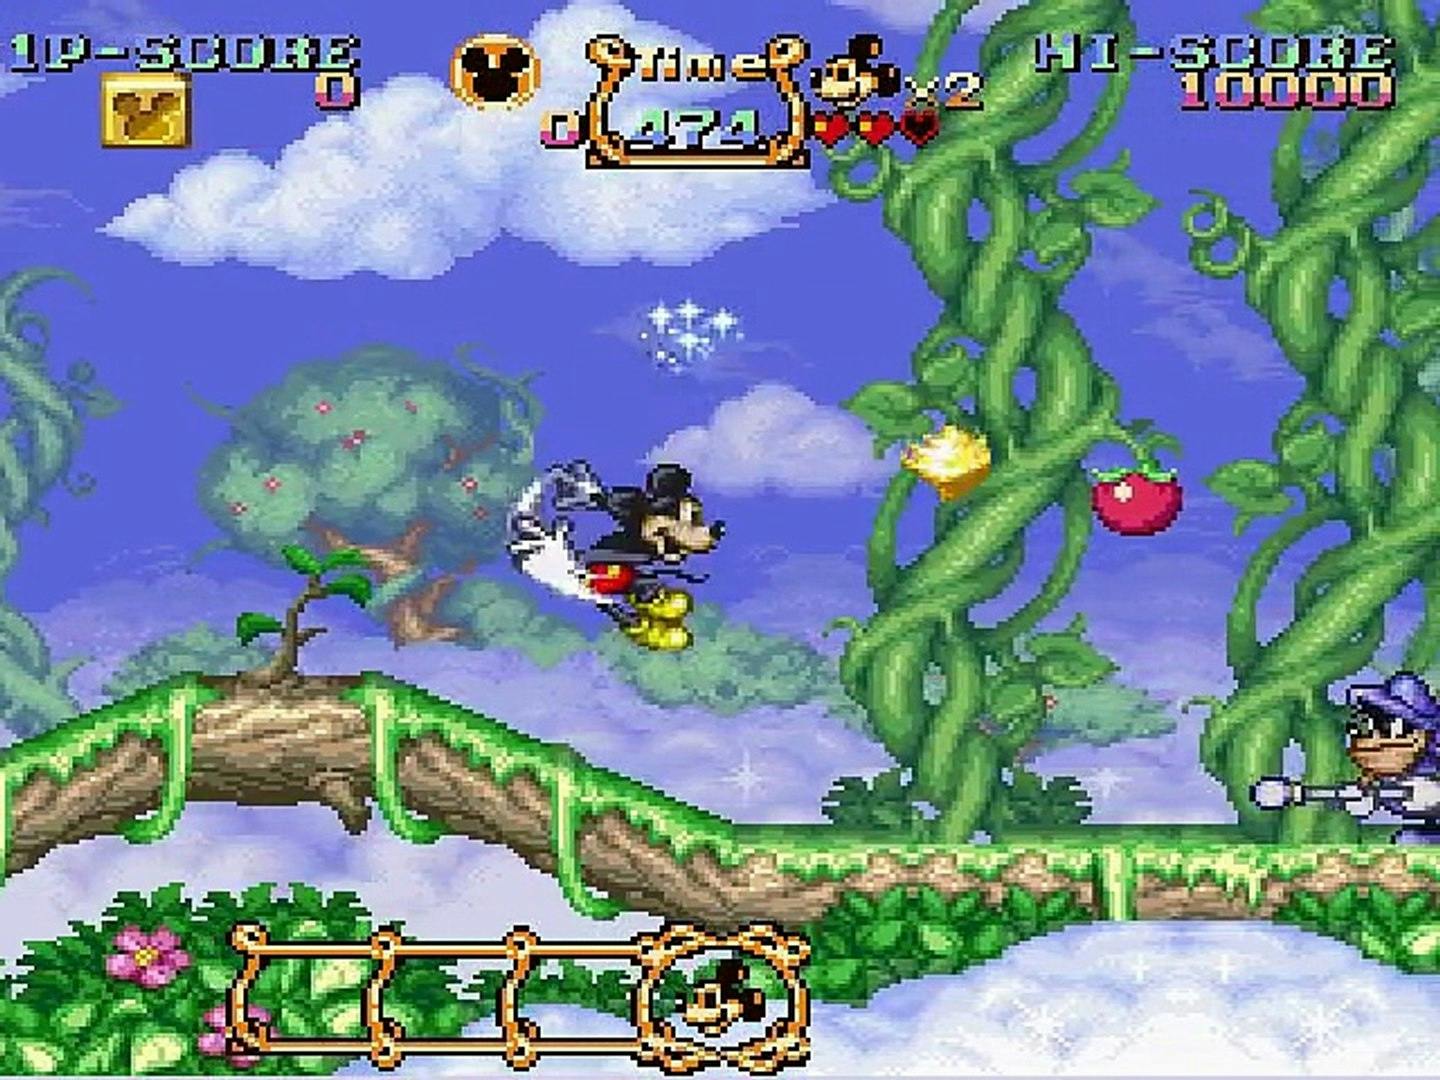 Mickey Mouse fight enemies